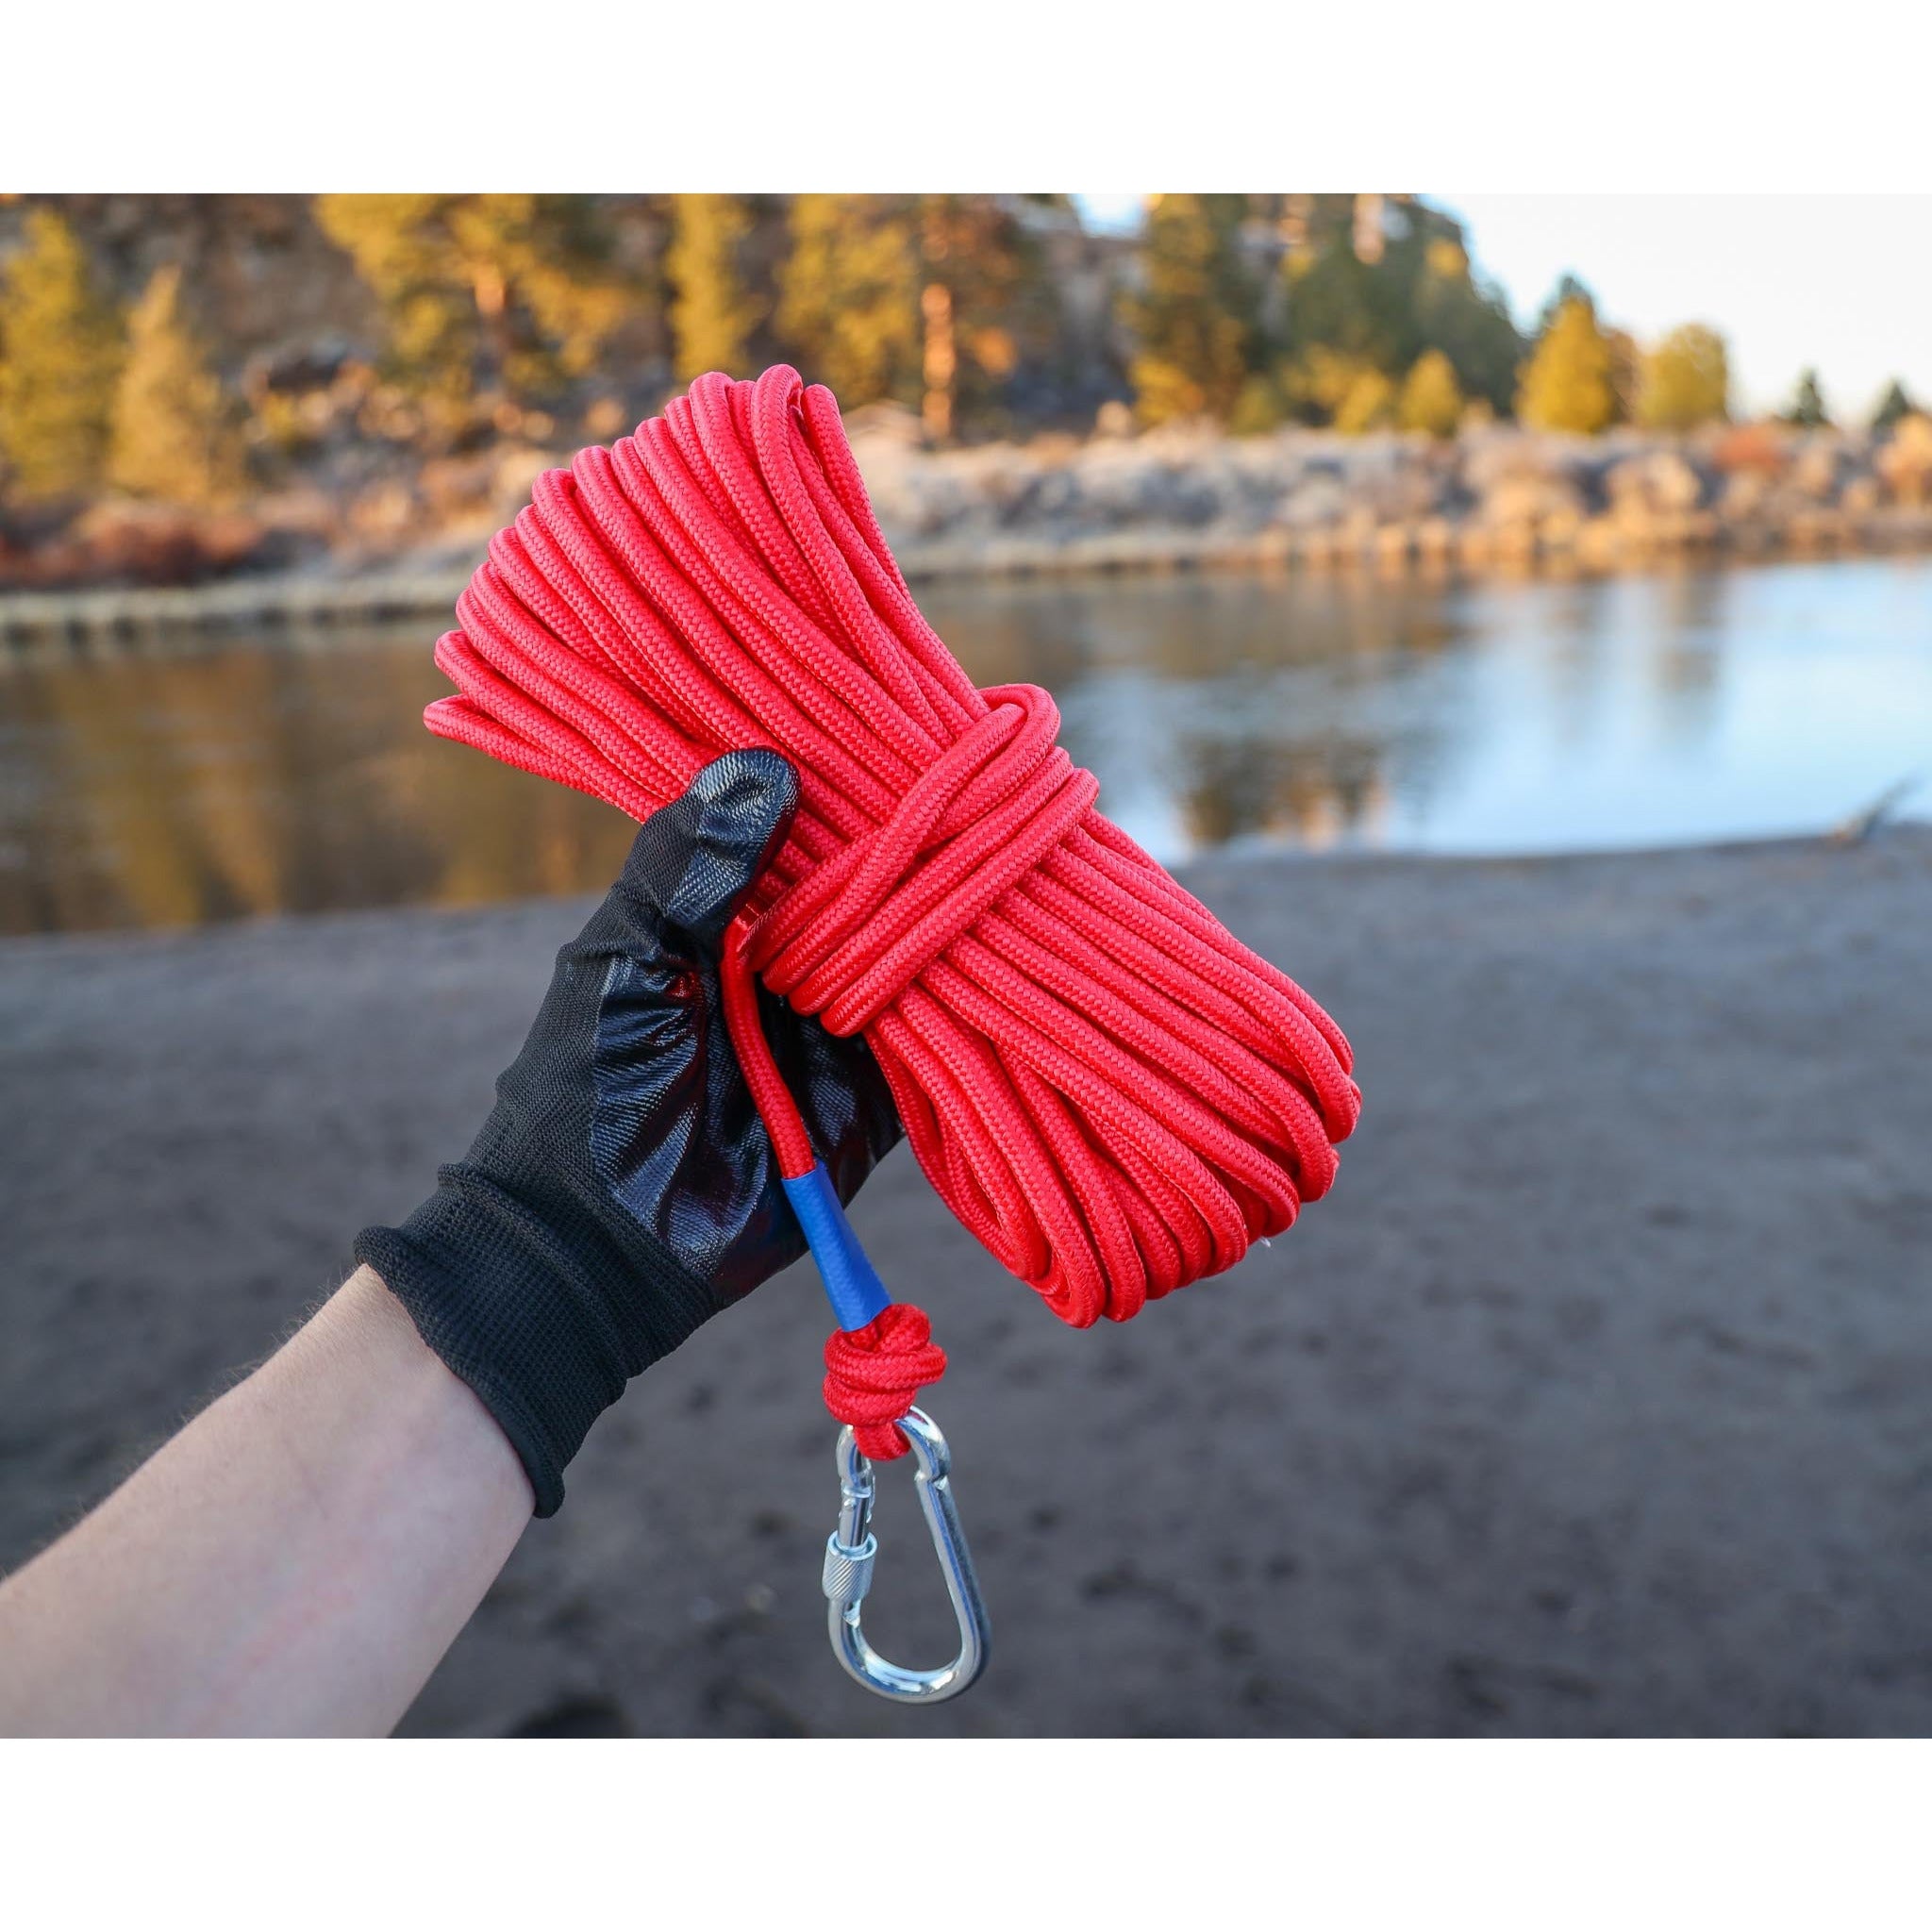 Fishing Magnet with Grappling Hooks，66ft Rope & Glove,760LB